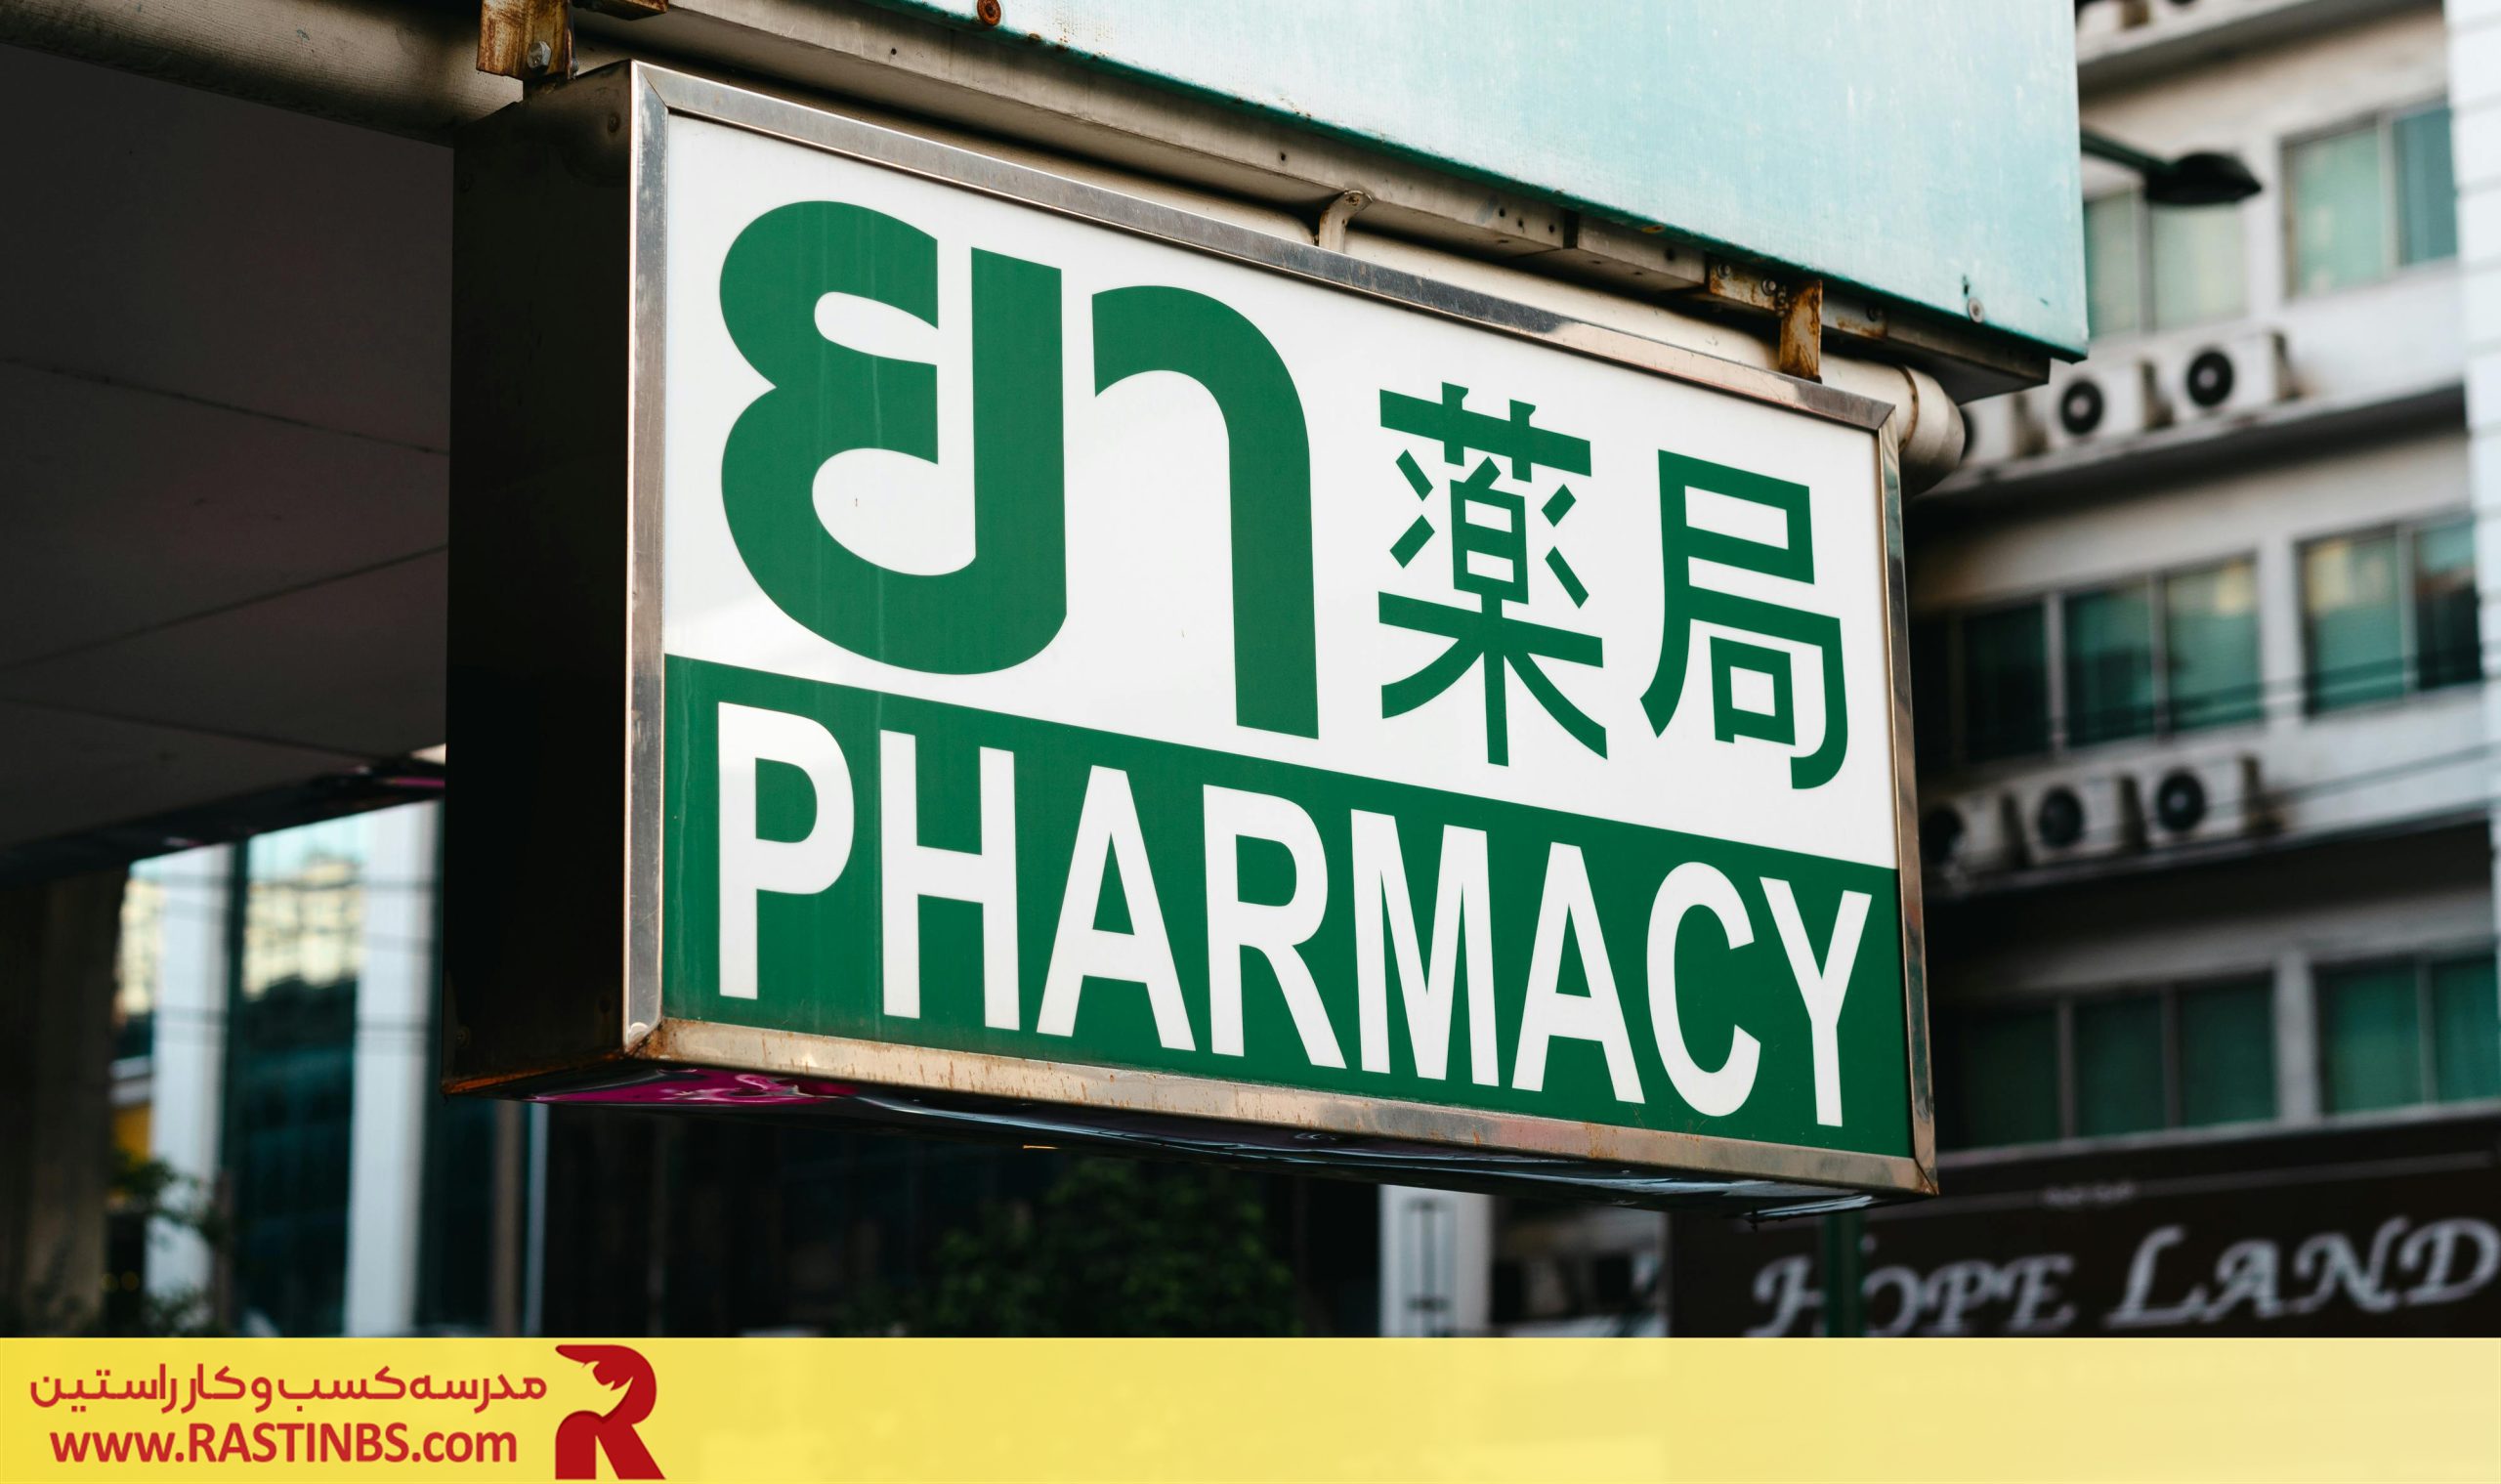 Legal and regulatory developments in the pharmacy industry